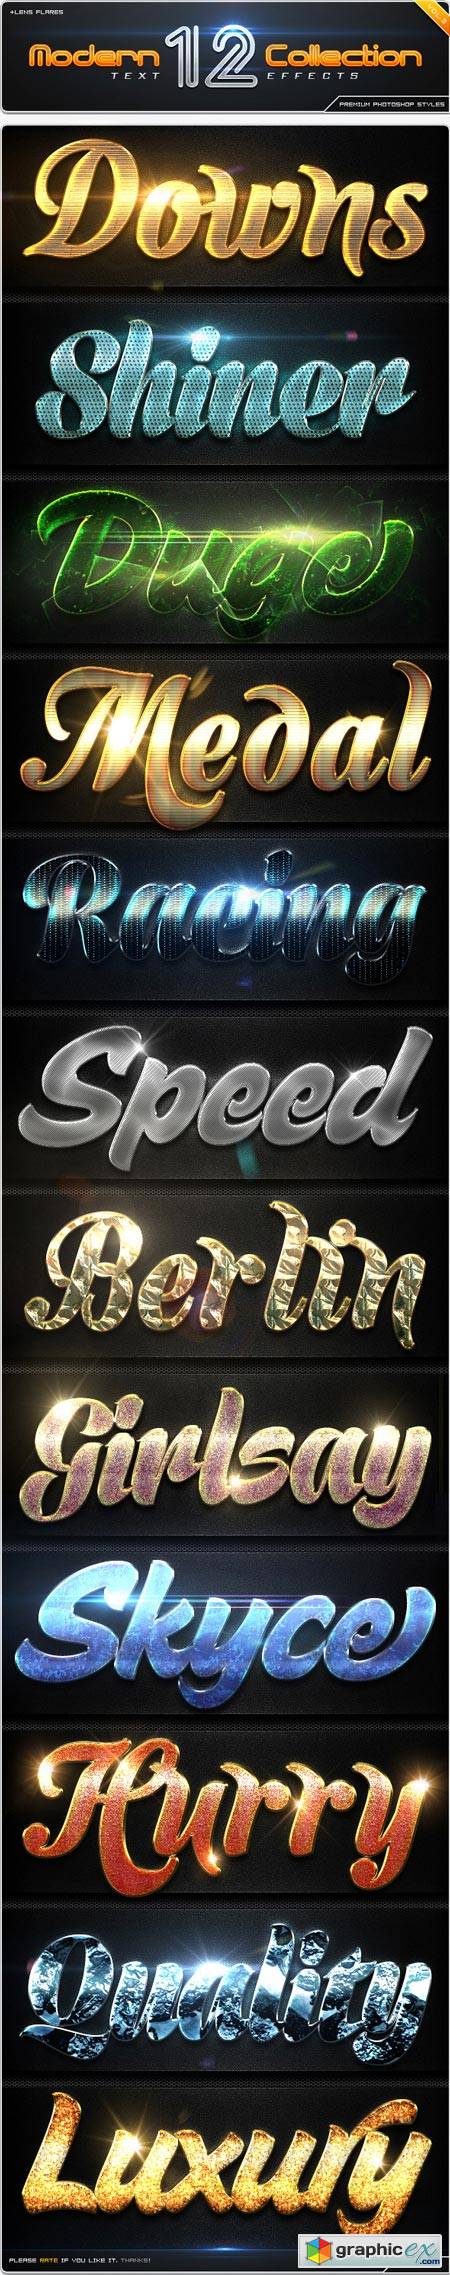 12 Modern Collection Text Effect Styles Vol.3 8833021